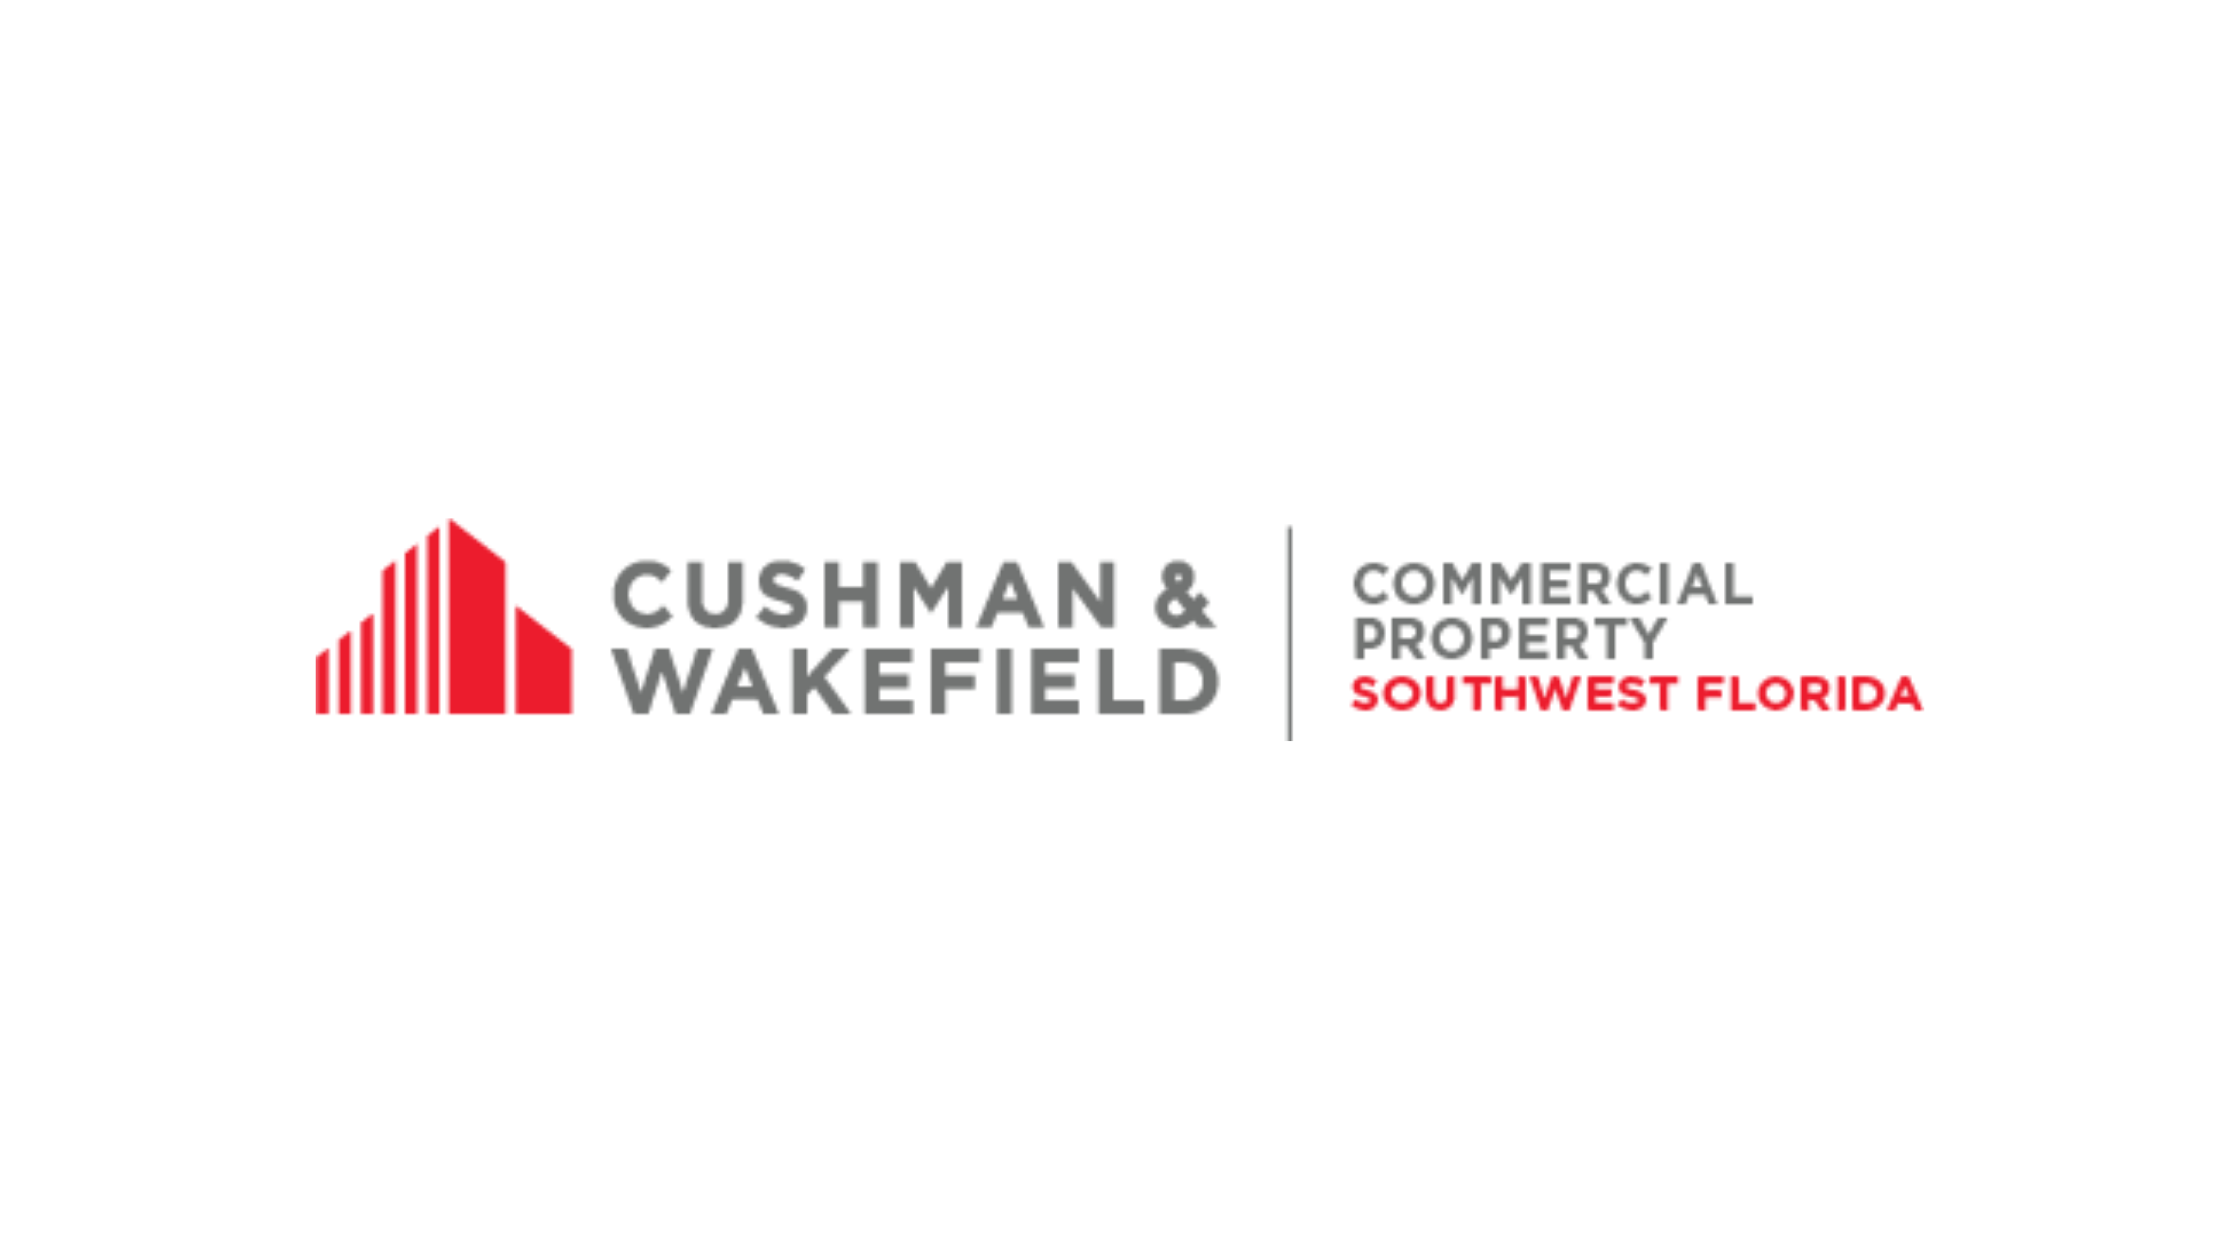 Cushman & Wakefield | Commercial Property Southwest Florida brokers $700K sale of Fort Myers property